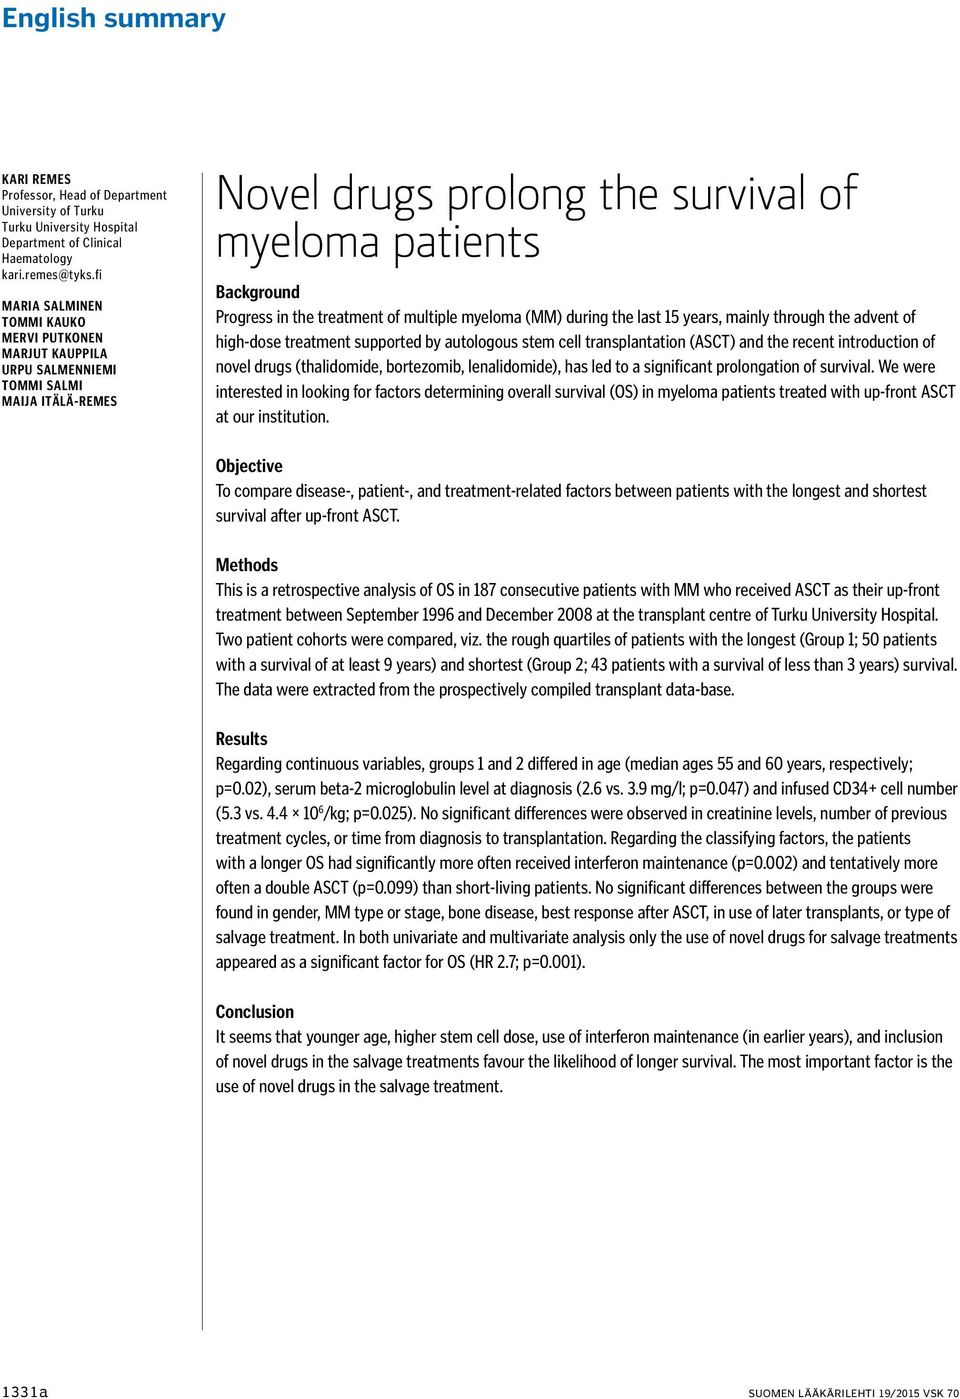 of multiple myeloma (MM) during the last 15 years, mainly through the advent of high-dose treatment supported by autologous stem cell transplantation (ASCT) and the recent introduction of novel drugs